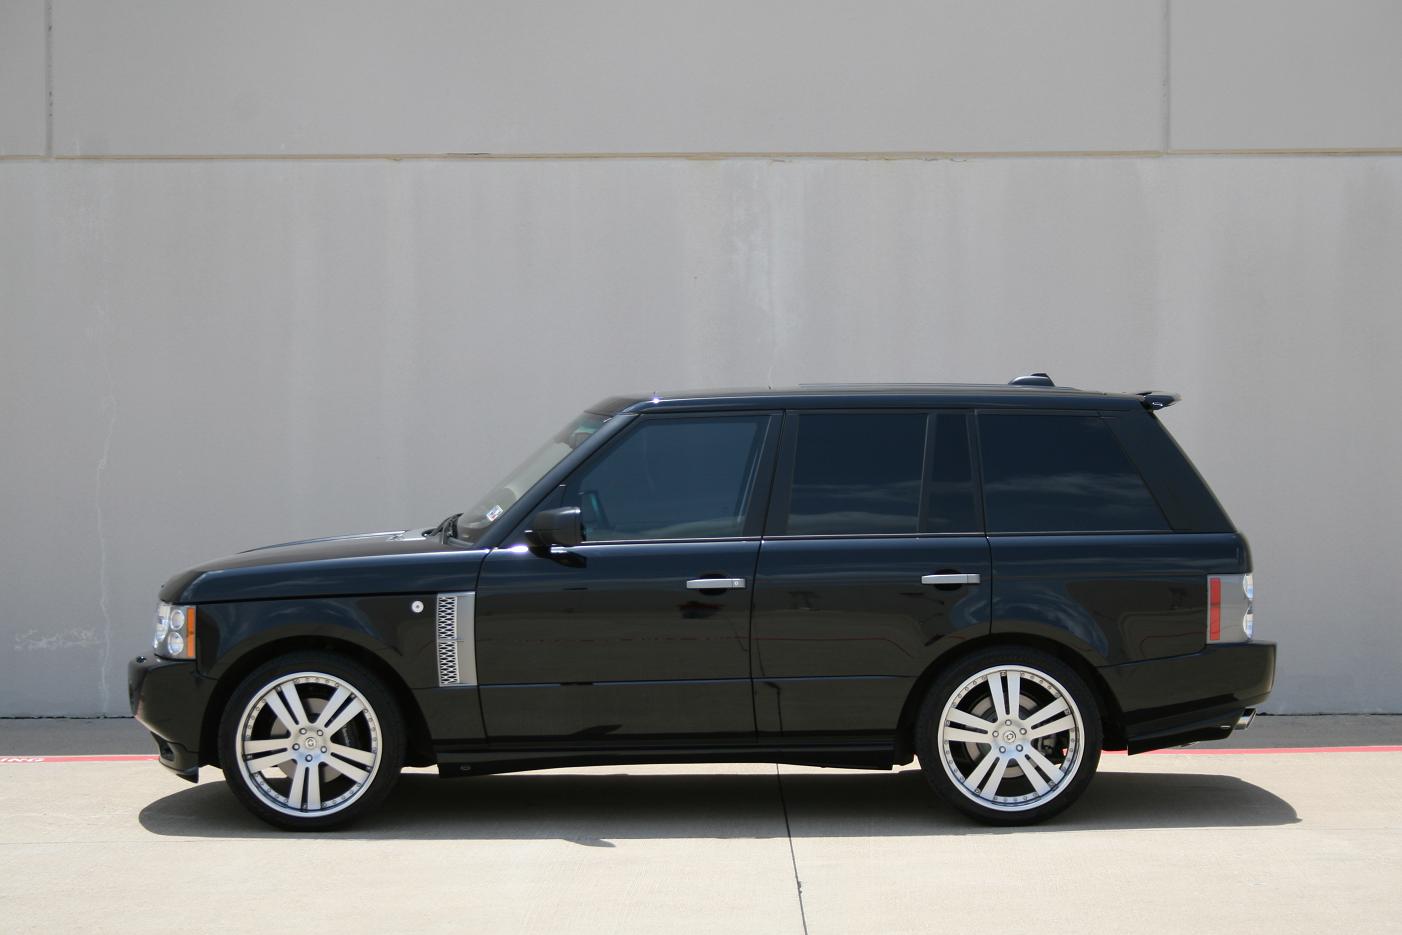 2008 White Range Rover Supercharged